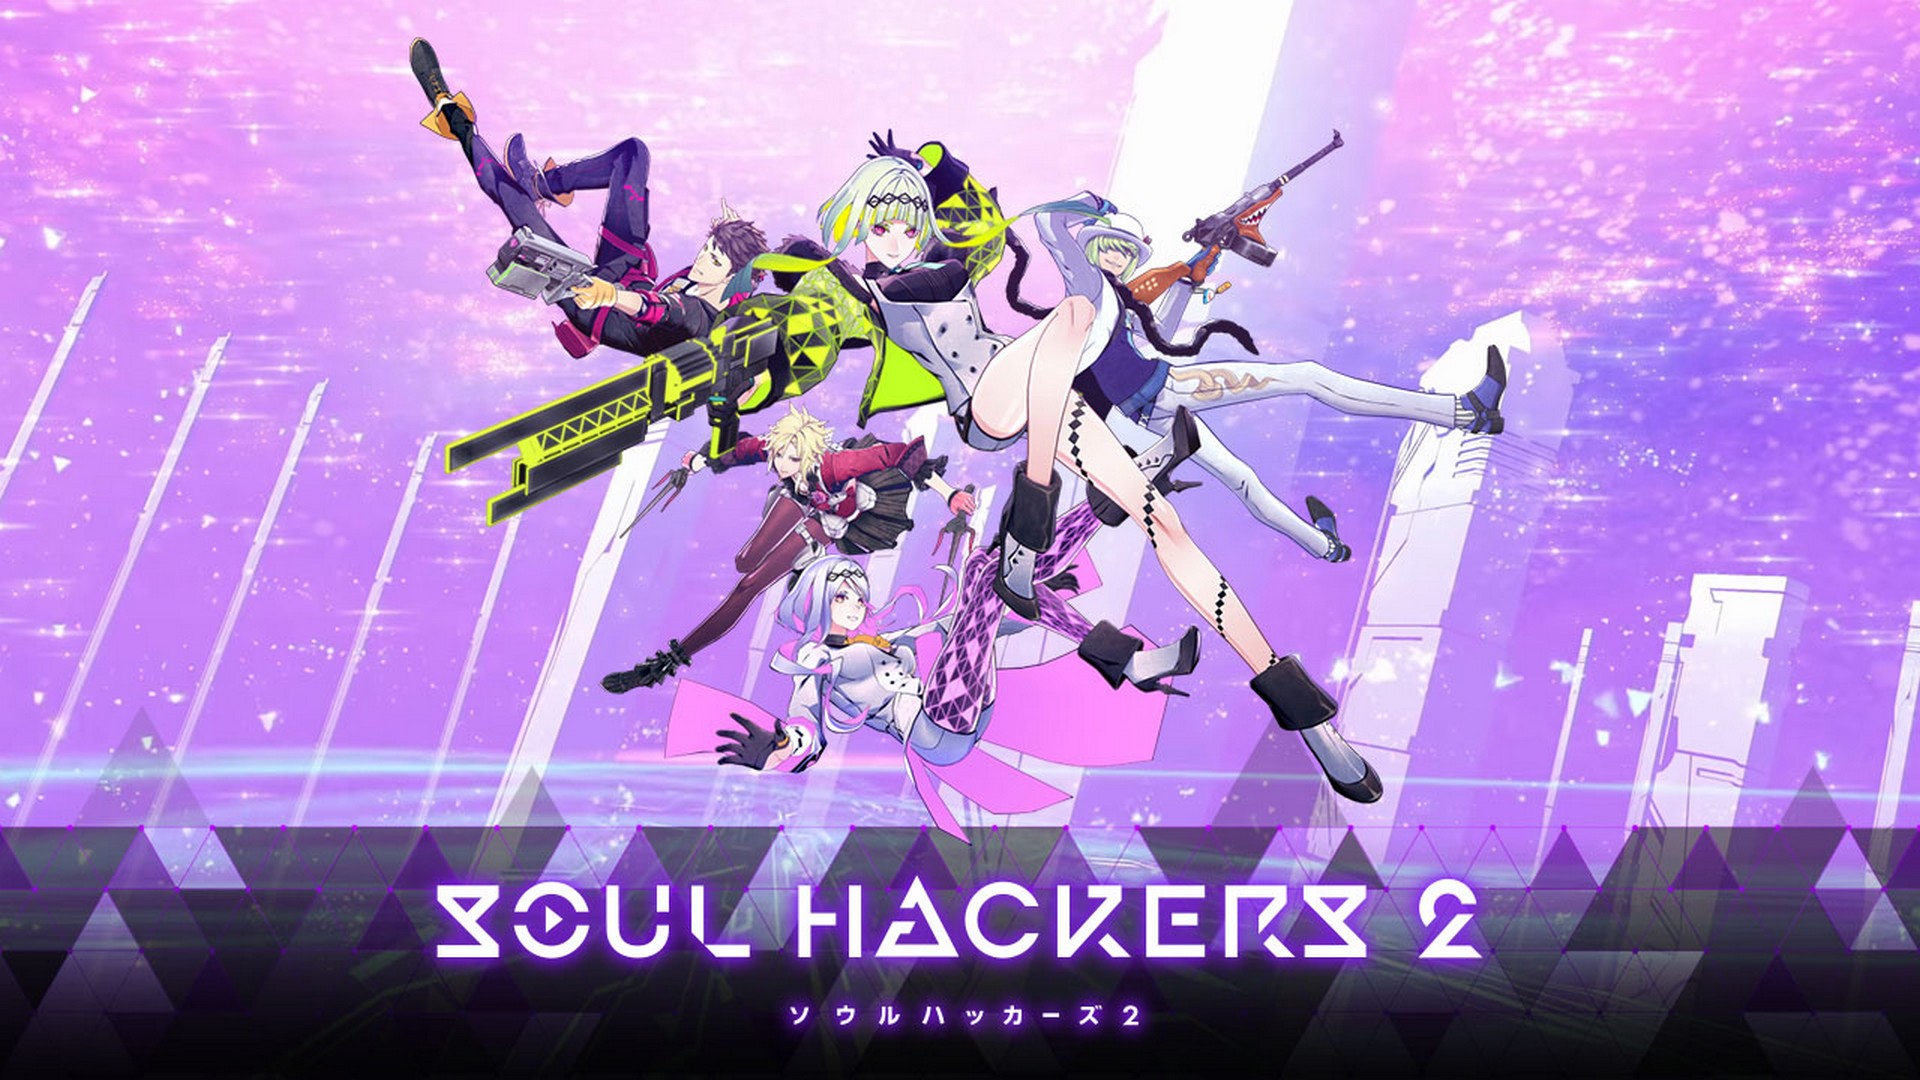 Soul Hackers 2 Release Date & Announcement Trailer Revealed